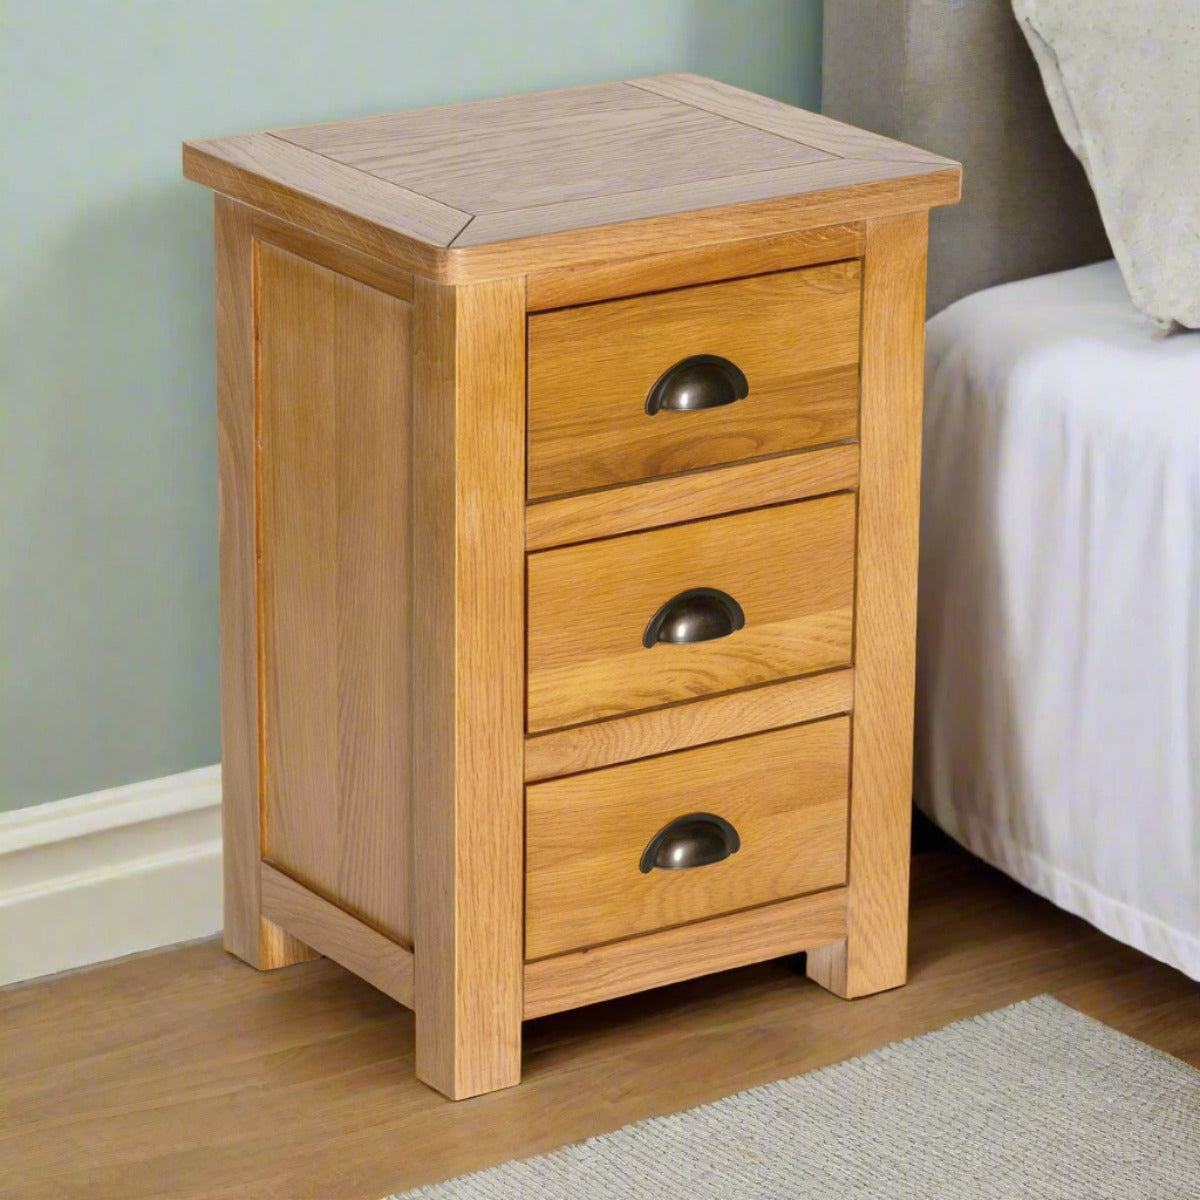 O-0003-oak-bedside-table-cabinet-solid-wood-fully-assembled-3drw-simply-bedsides-23